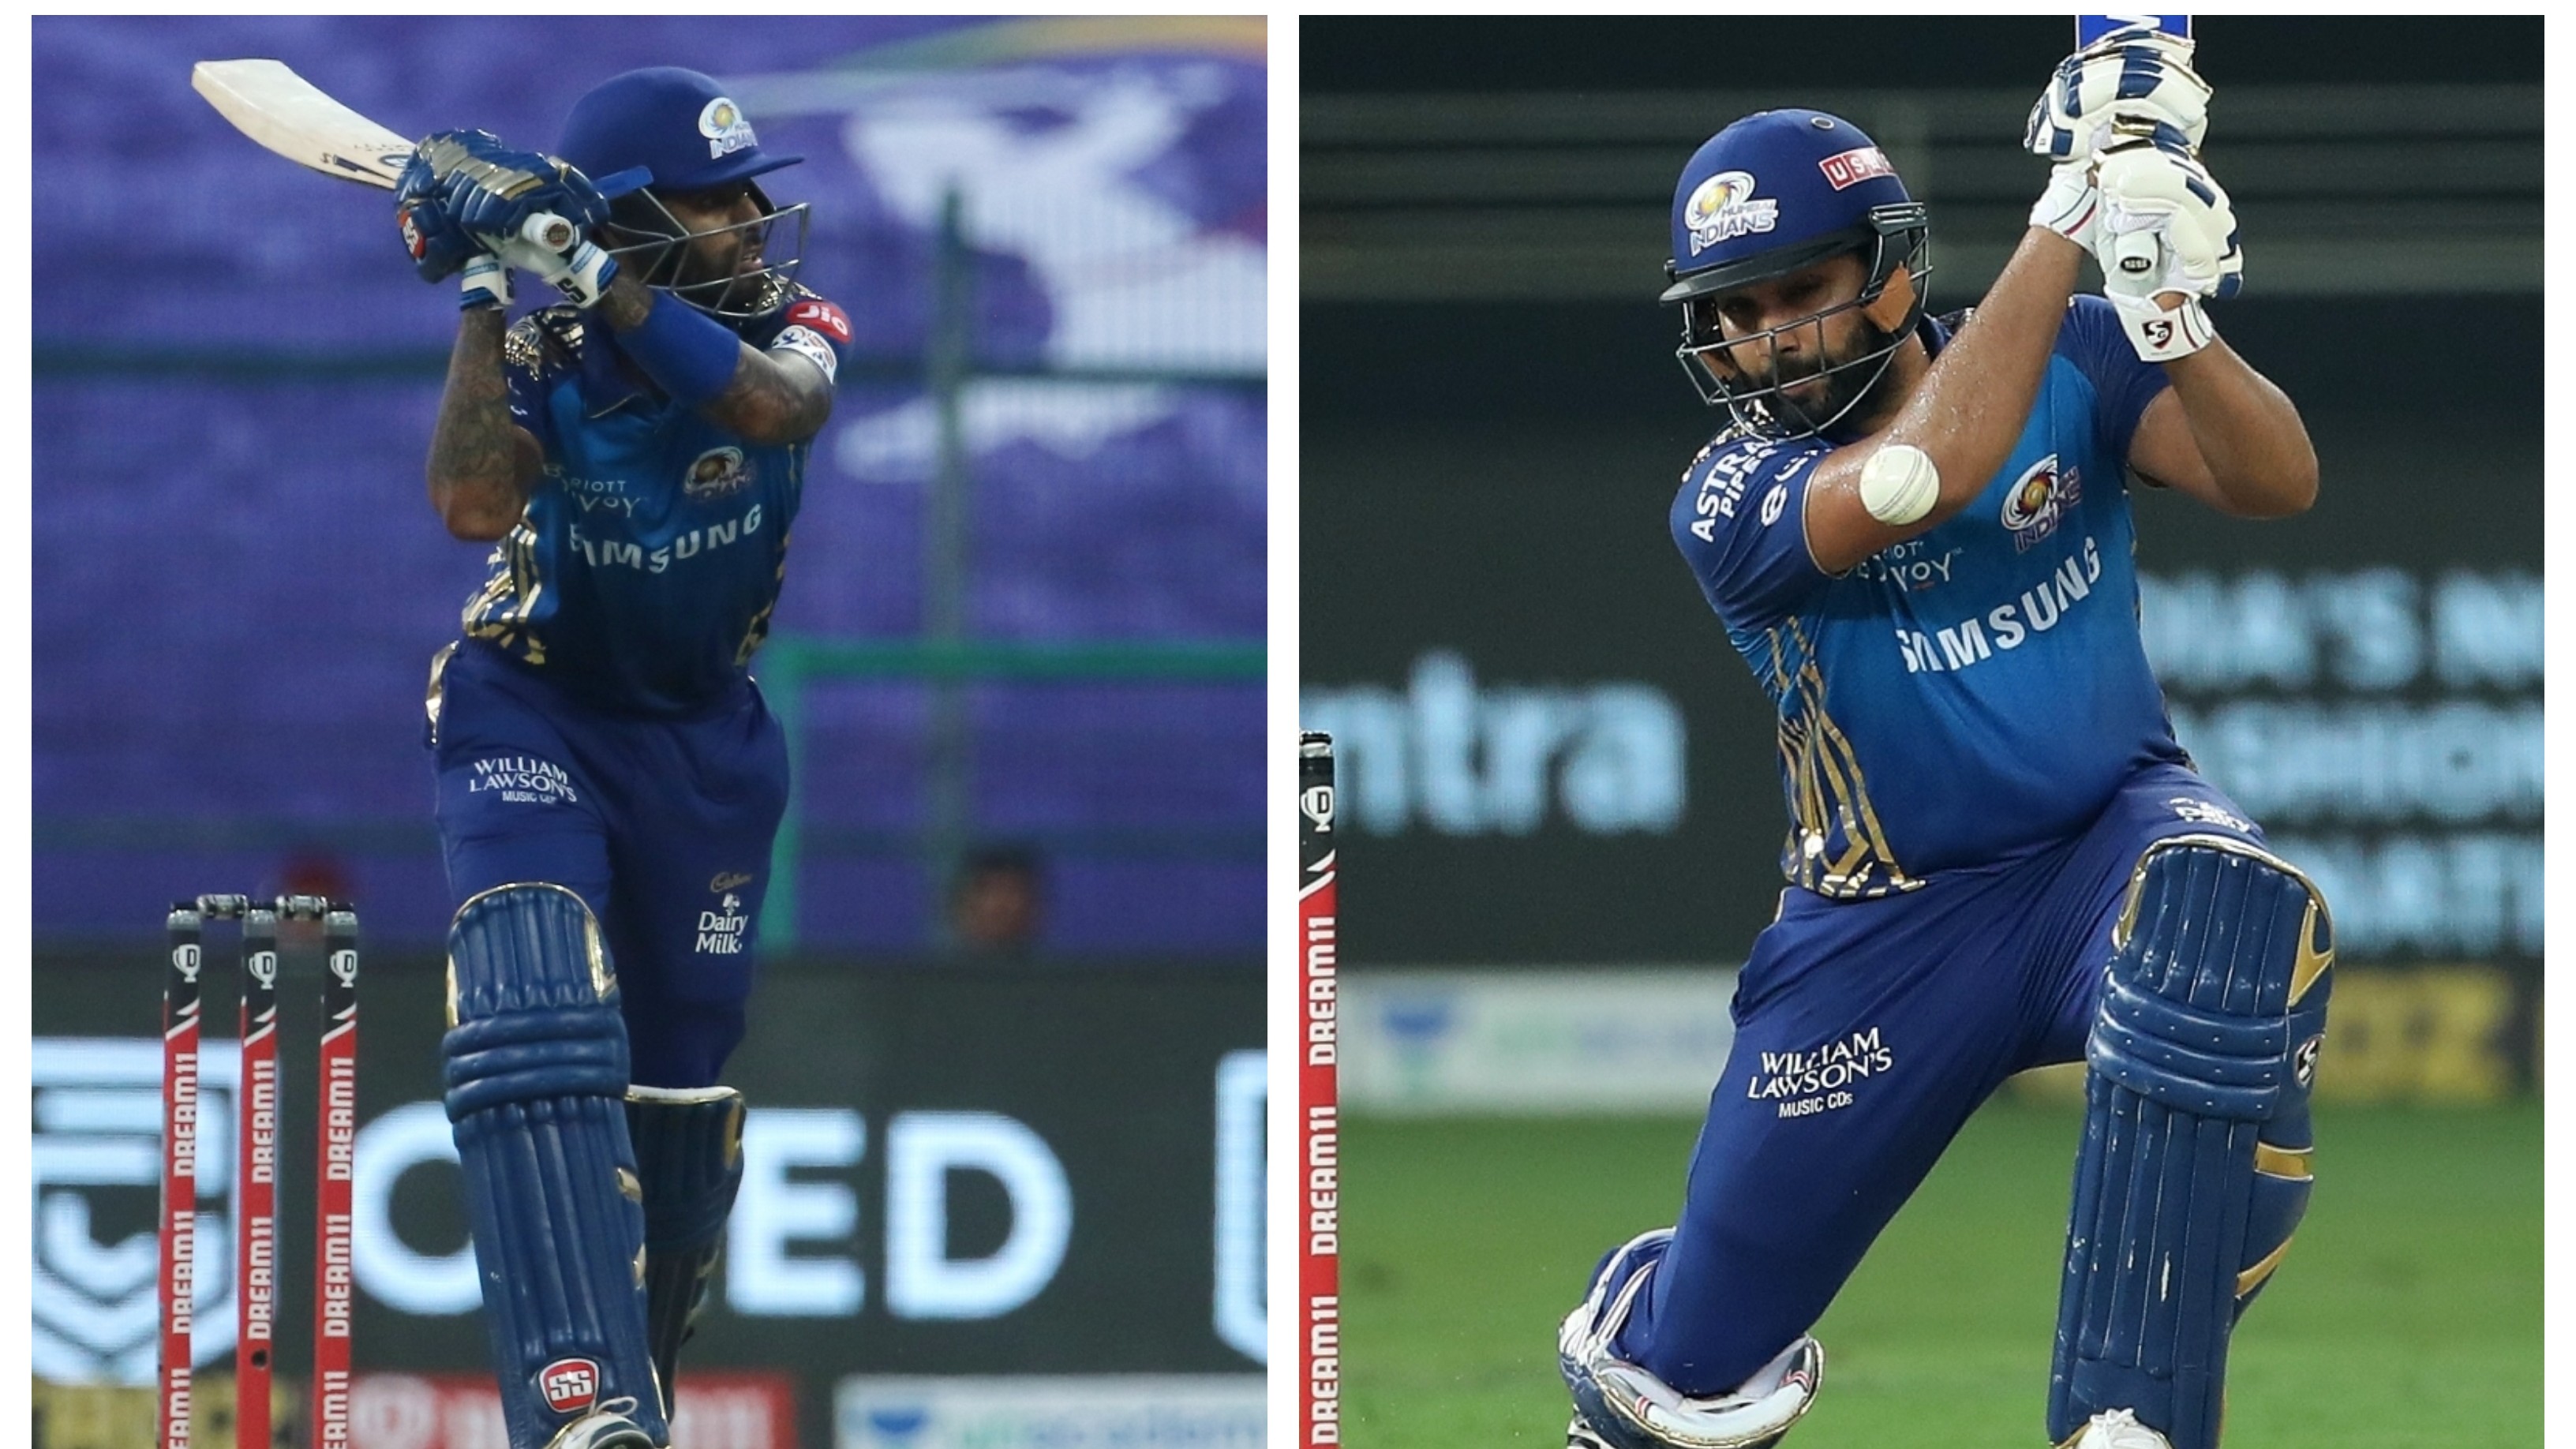 IPL 2020: ‘I try to grasp as much as I can from Rohit Sharma’, says Suryakumar Yadav